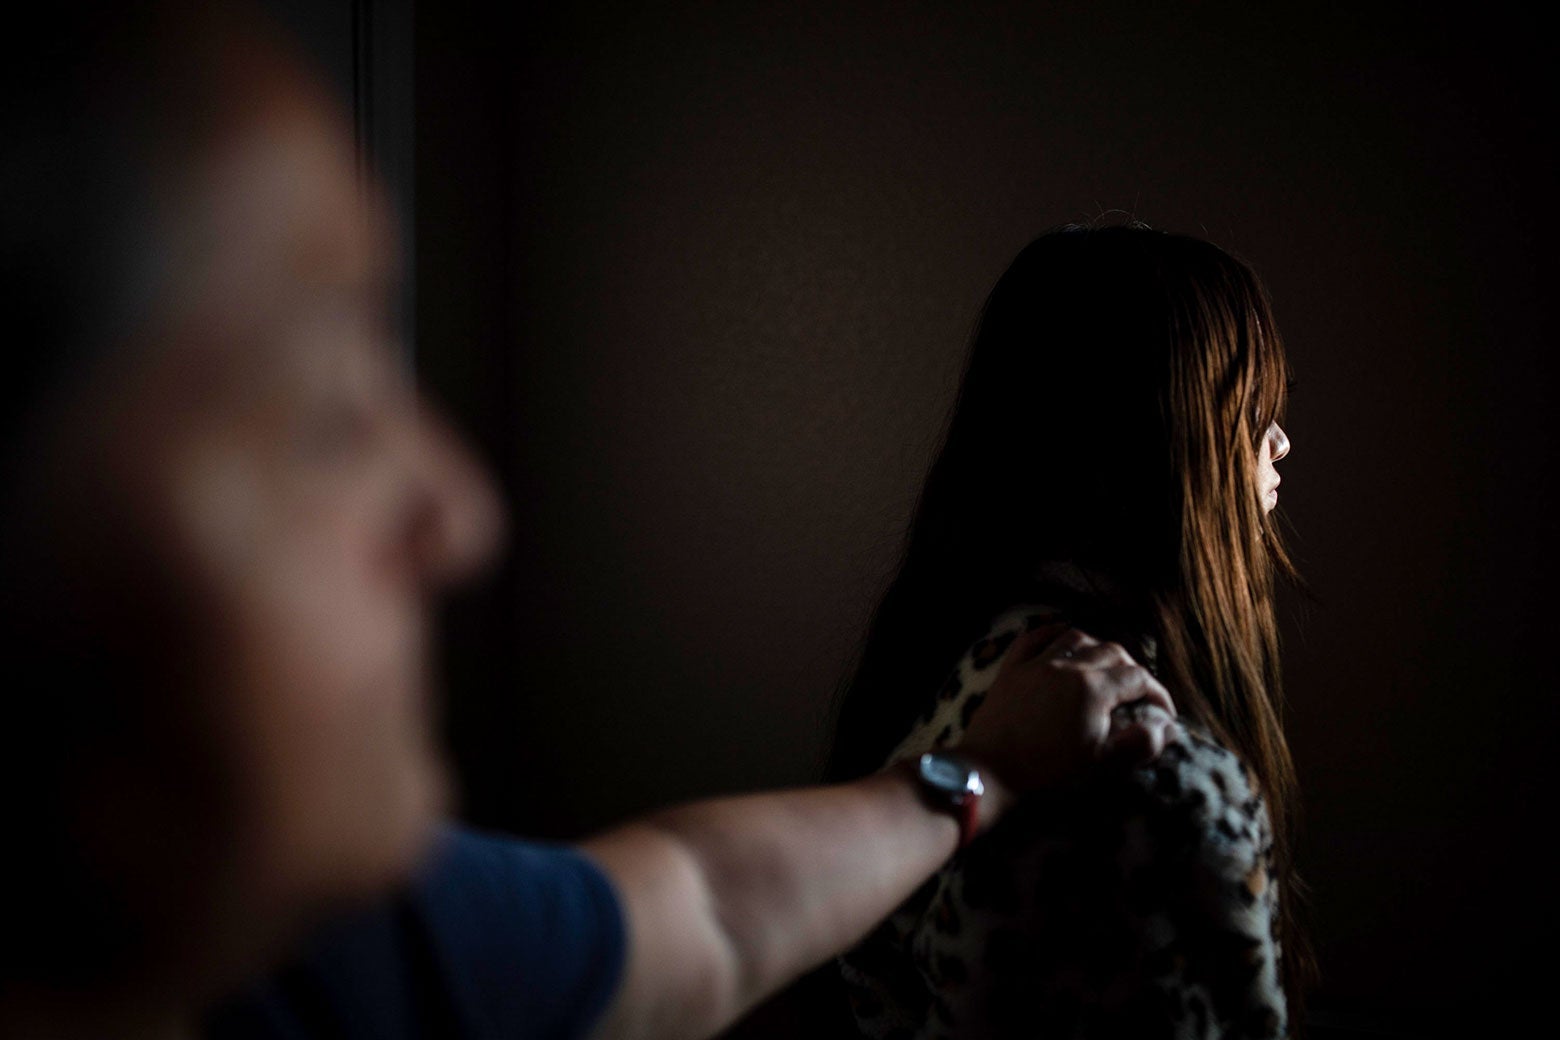 One Navajo girls story shows Americas failure to screen for sex trafficking. photo image